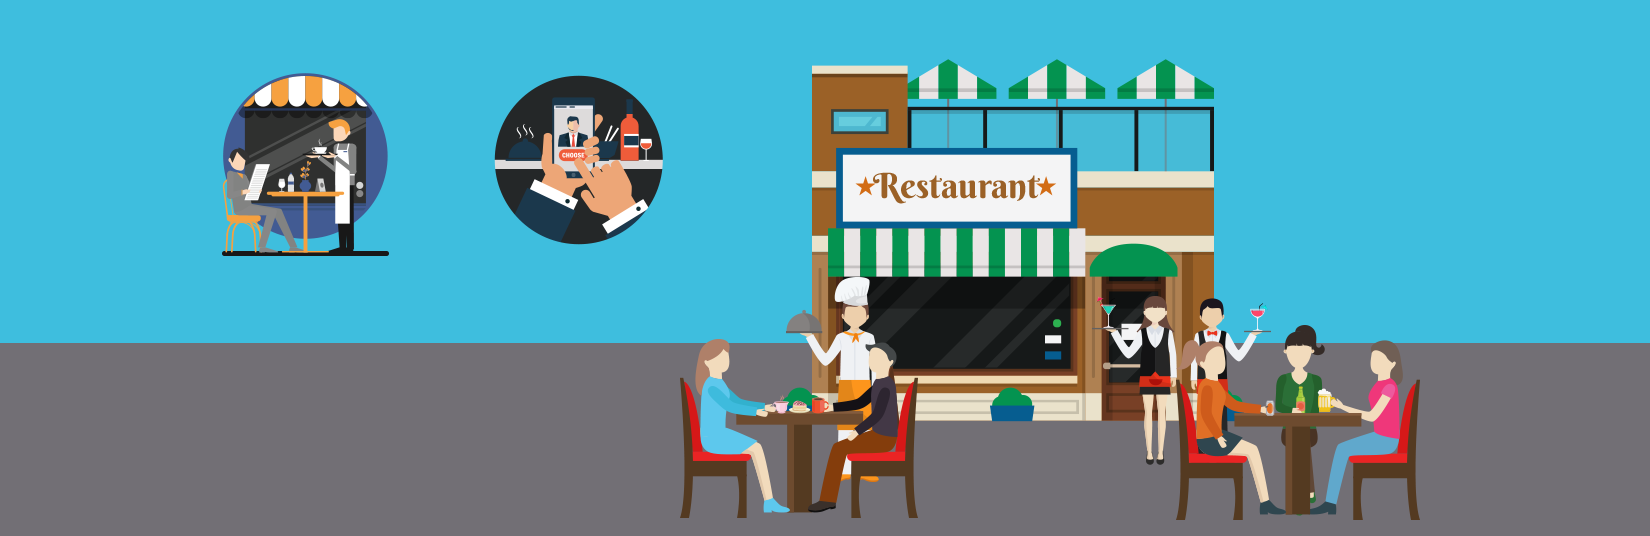 IoT is booming the restaurant industry